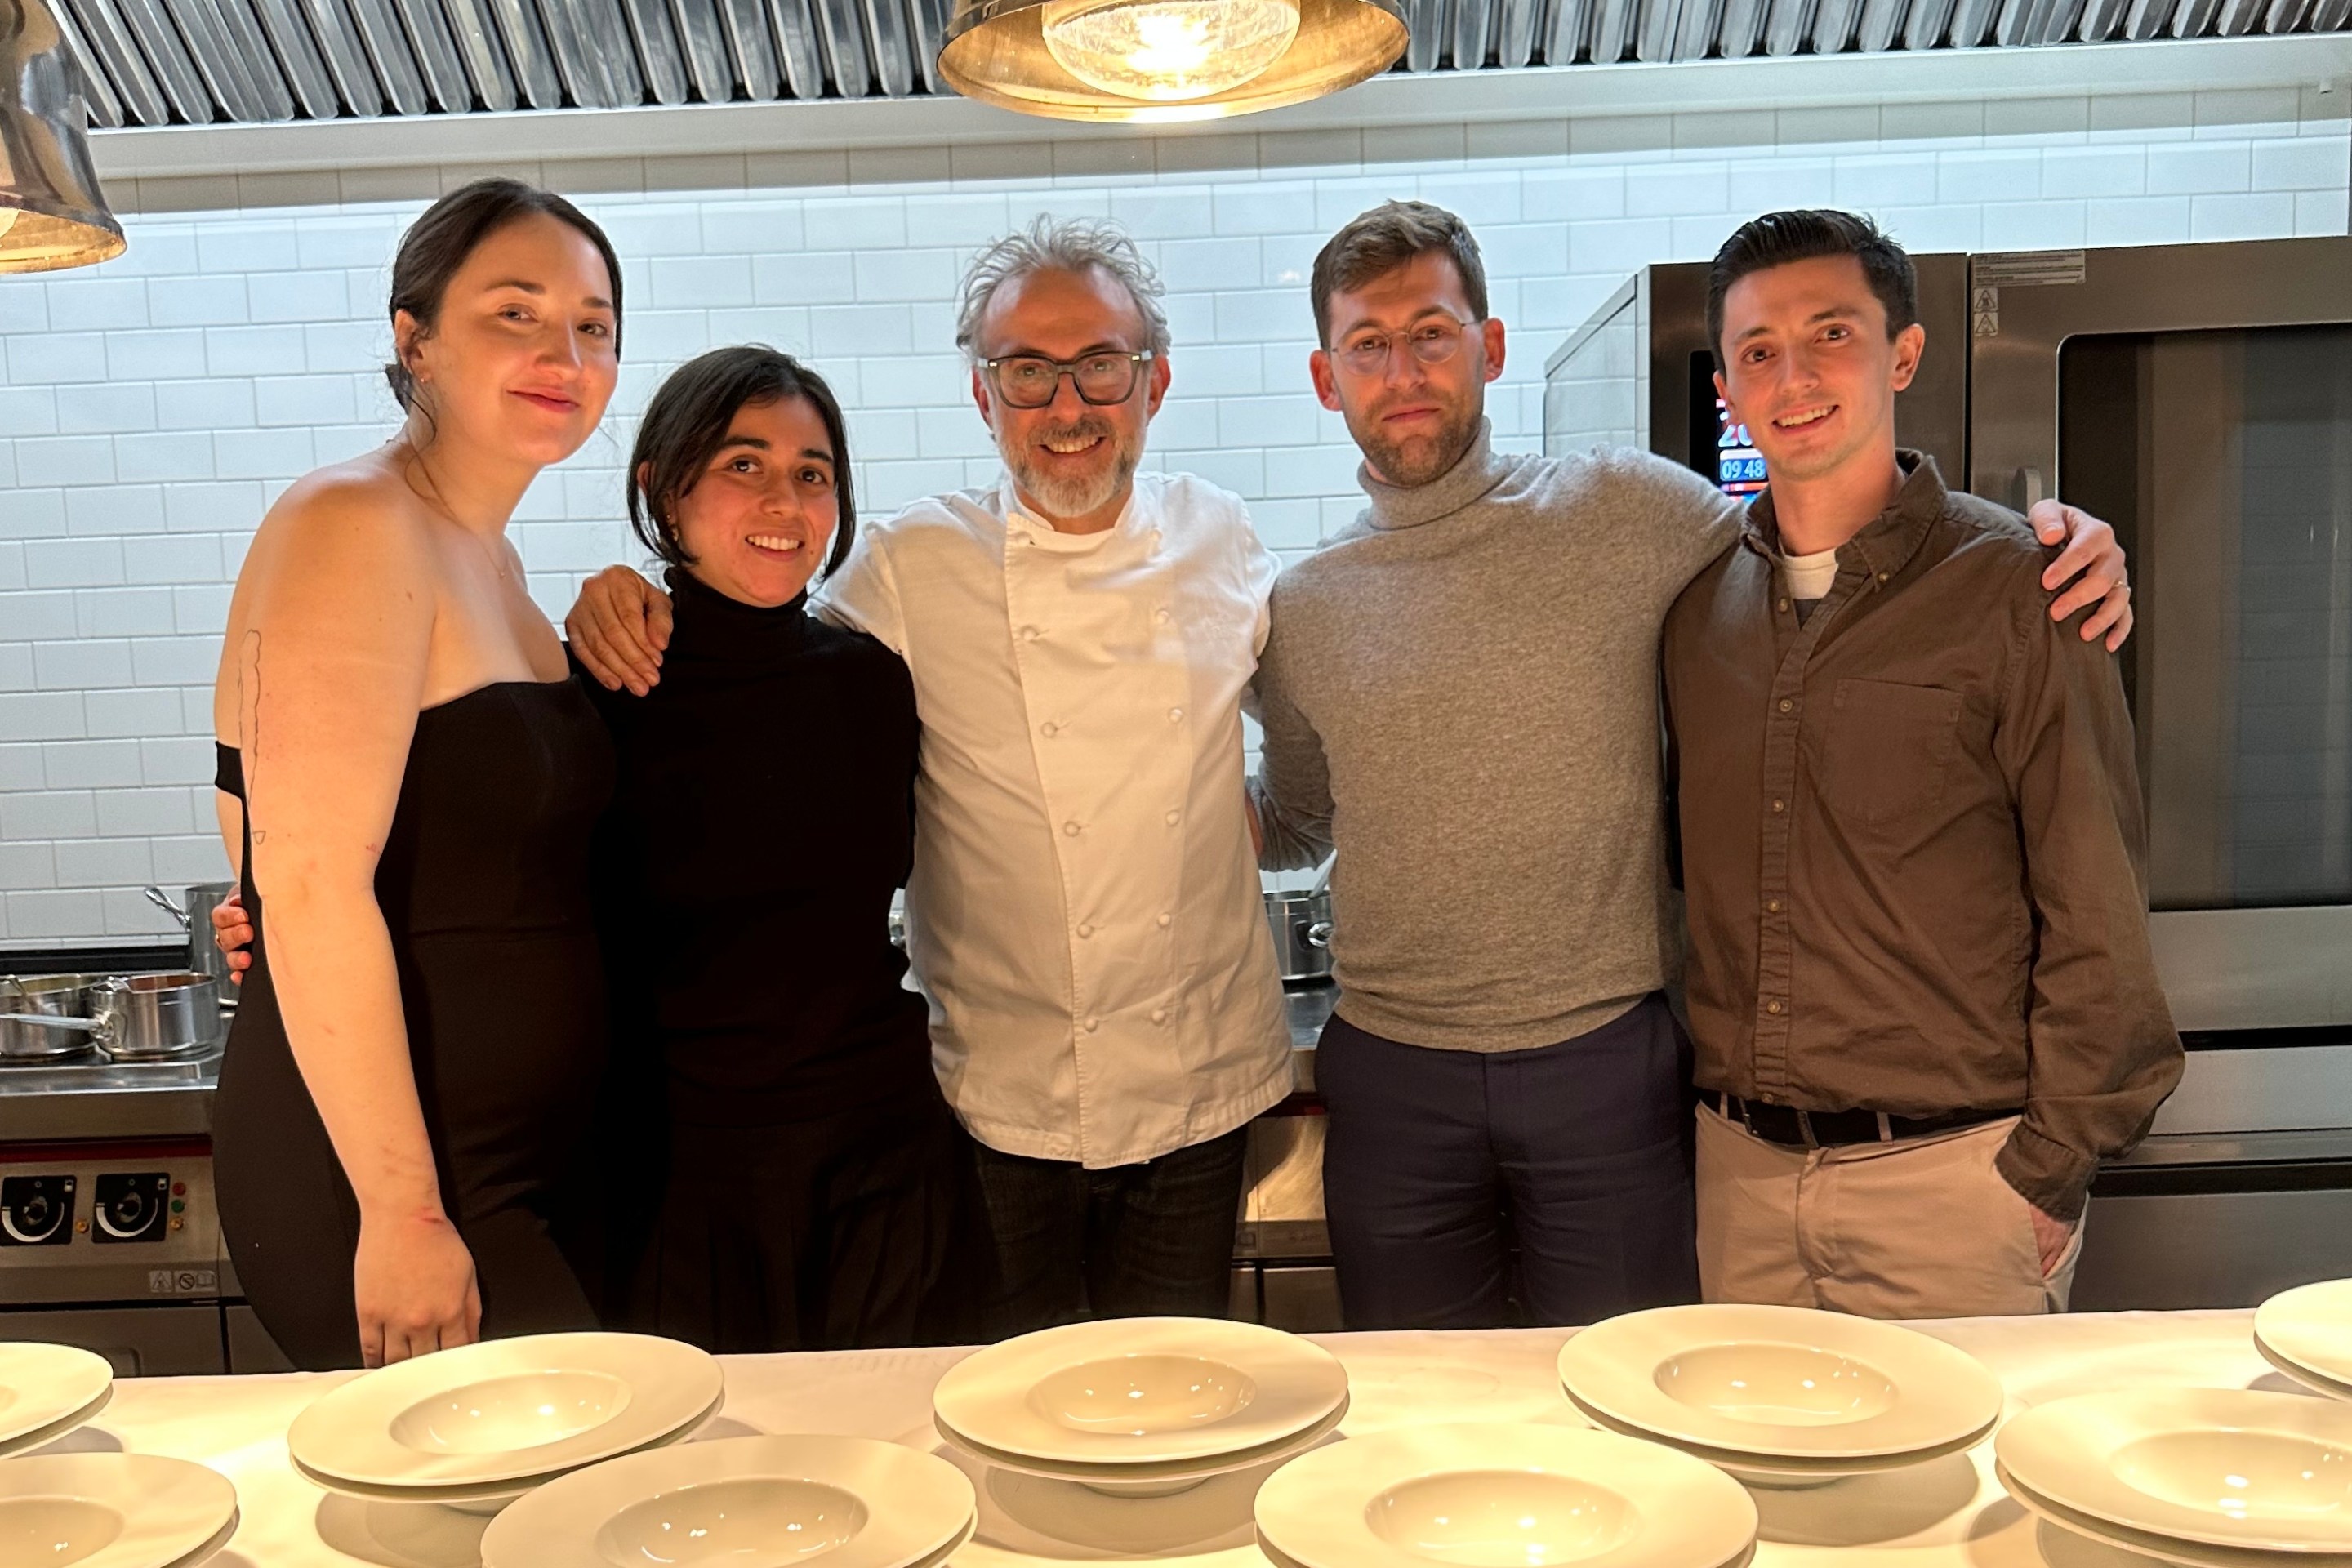 Massimo Bottura posing with guests